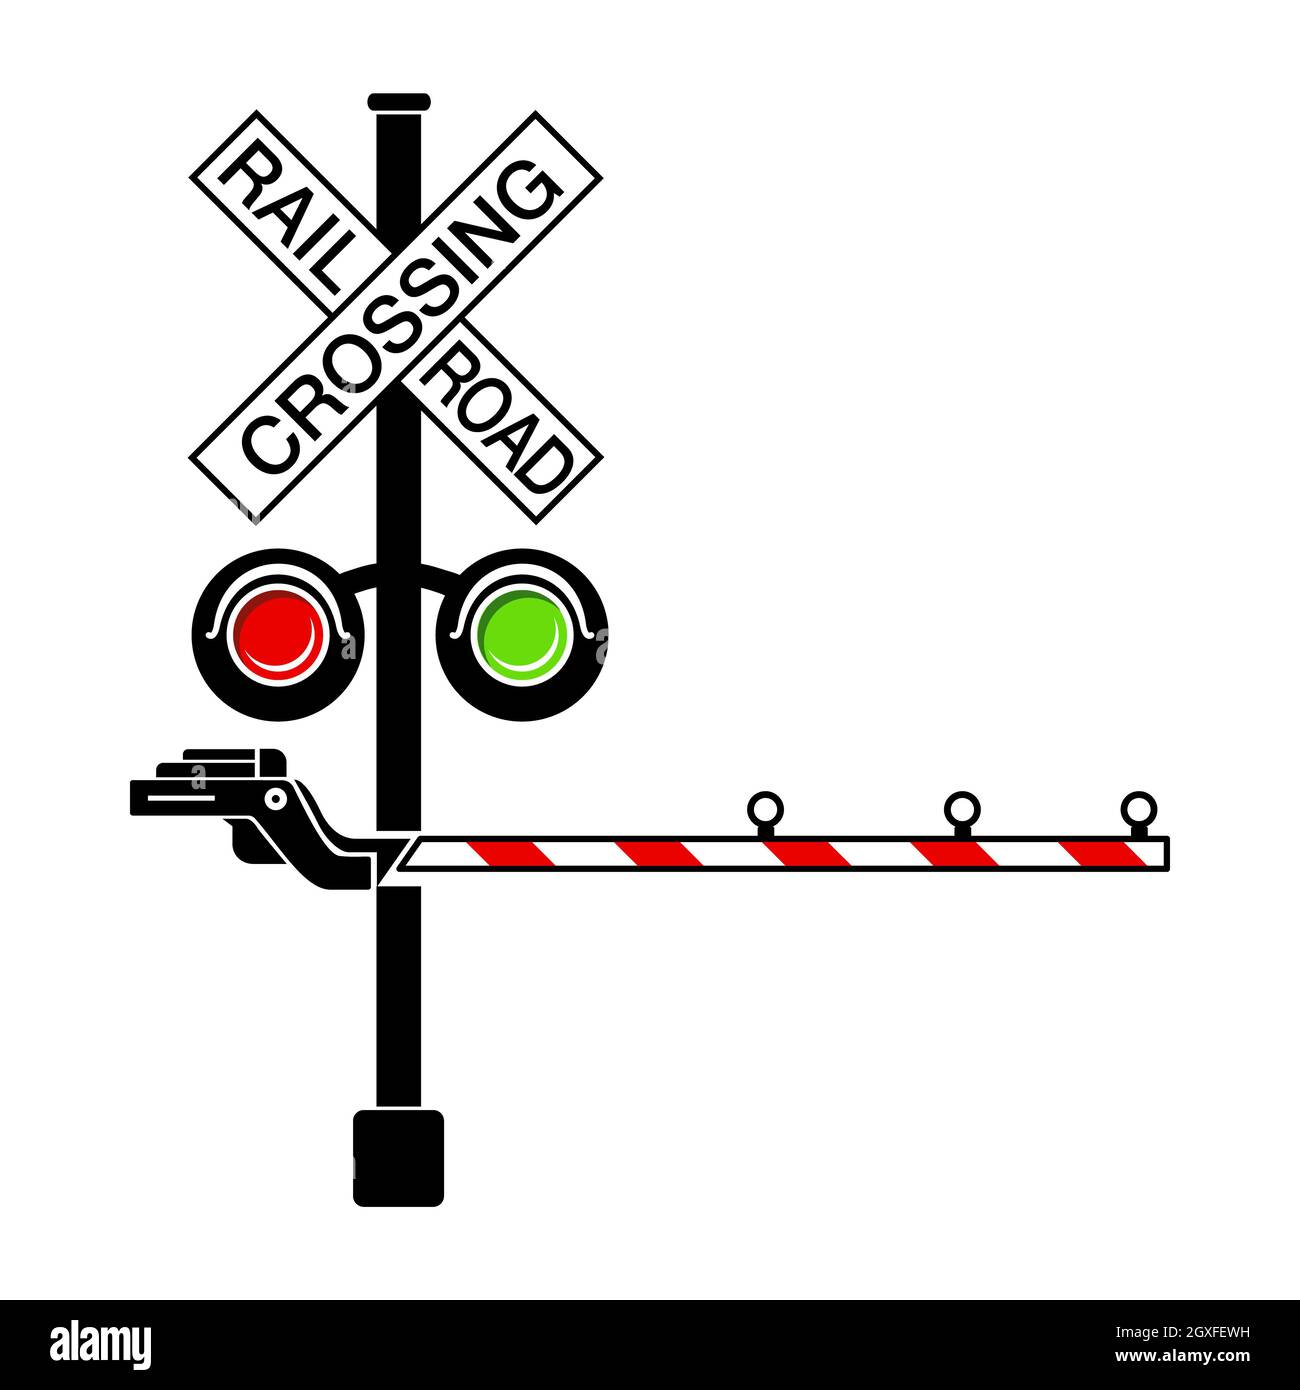 Rail crossing signal icon in simple style isolated on white background Stock Photo